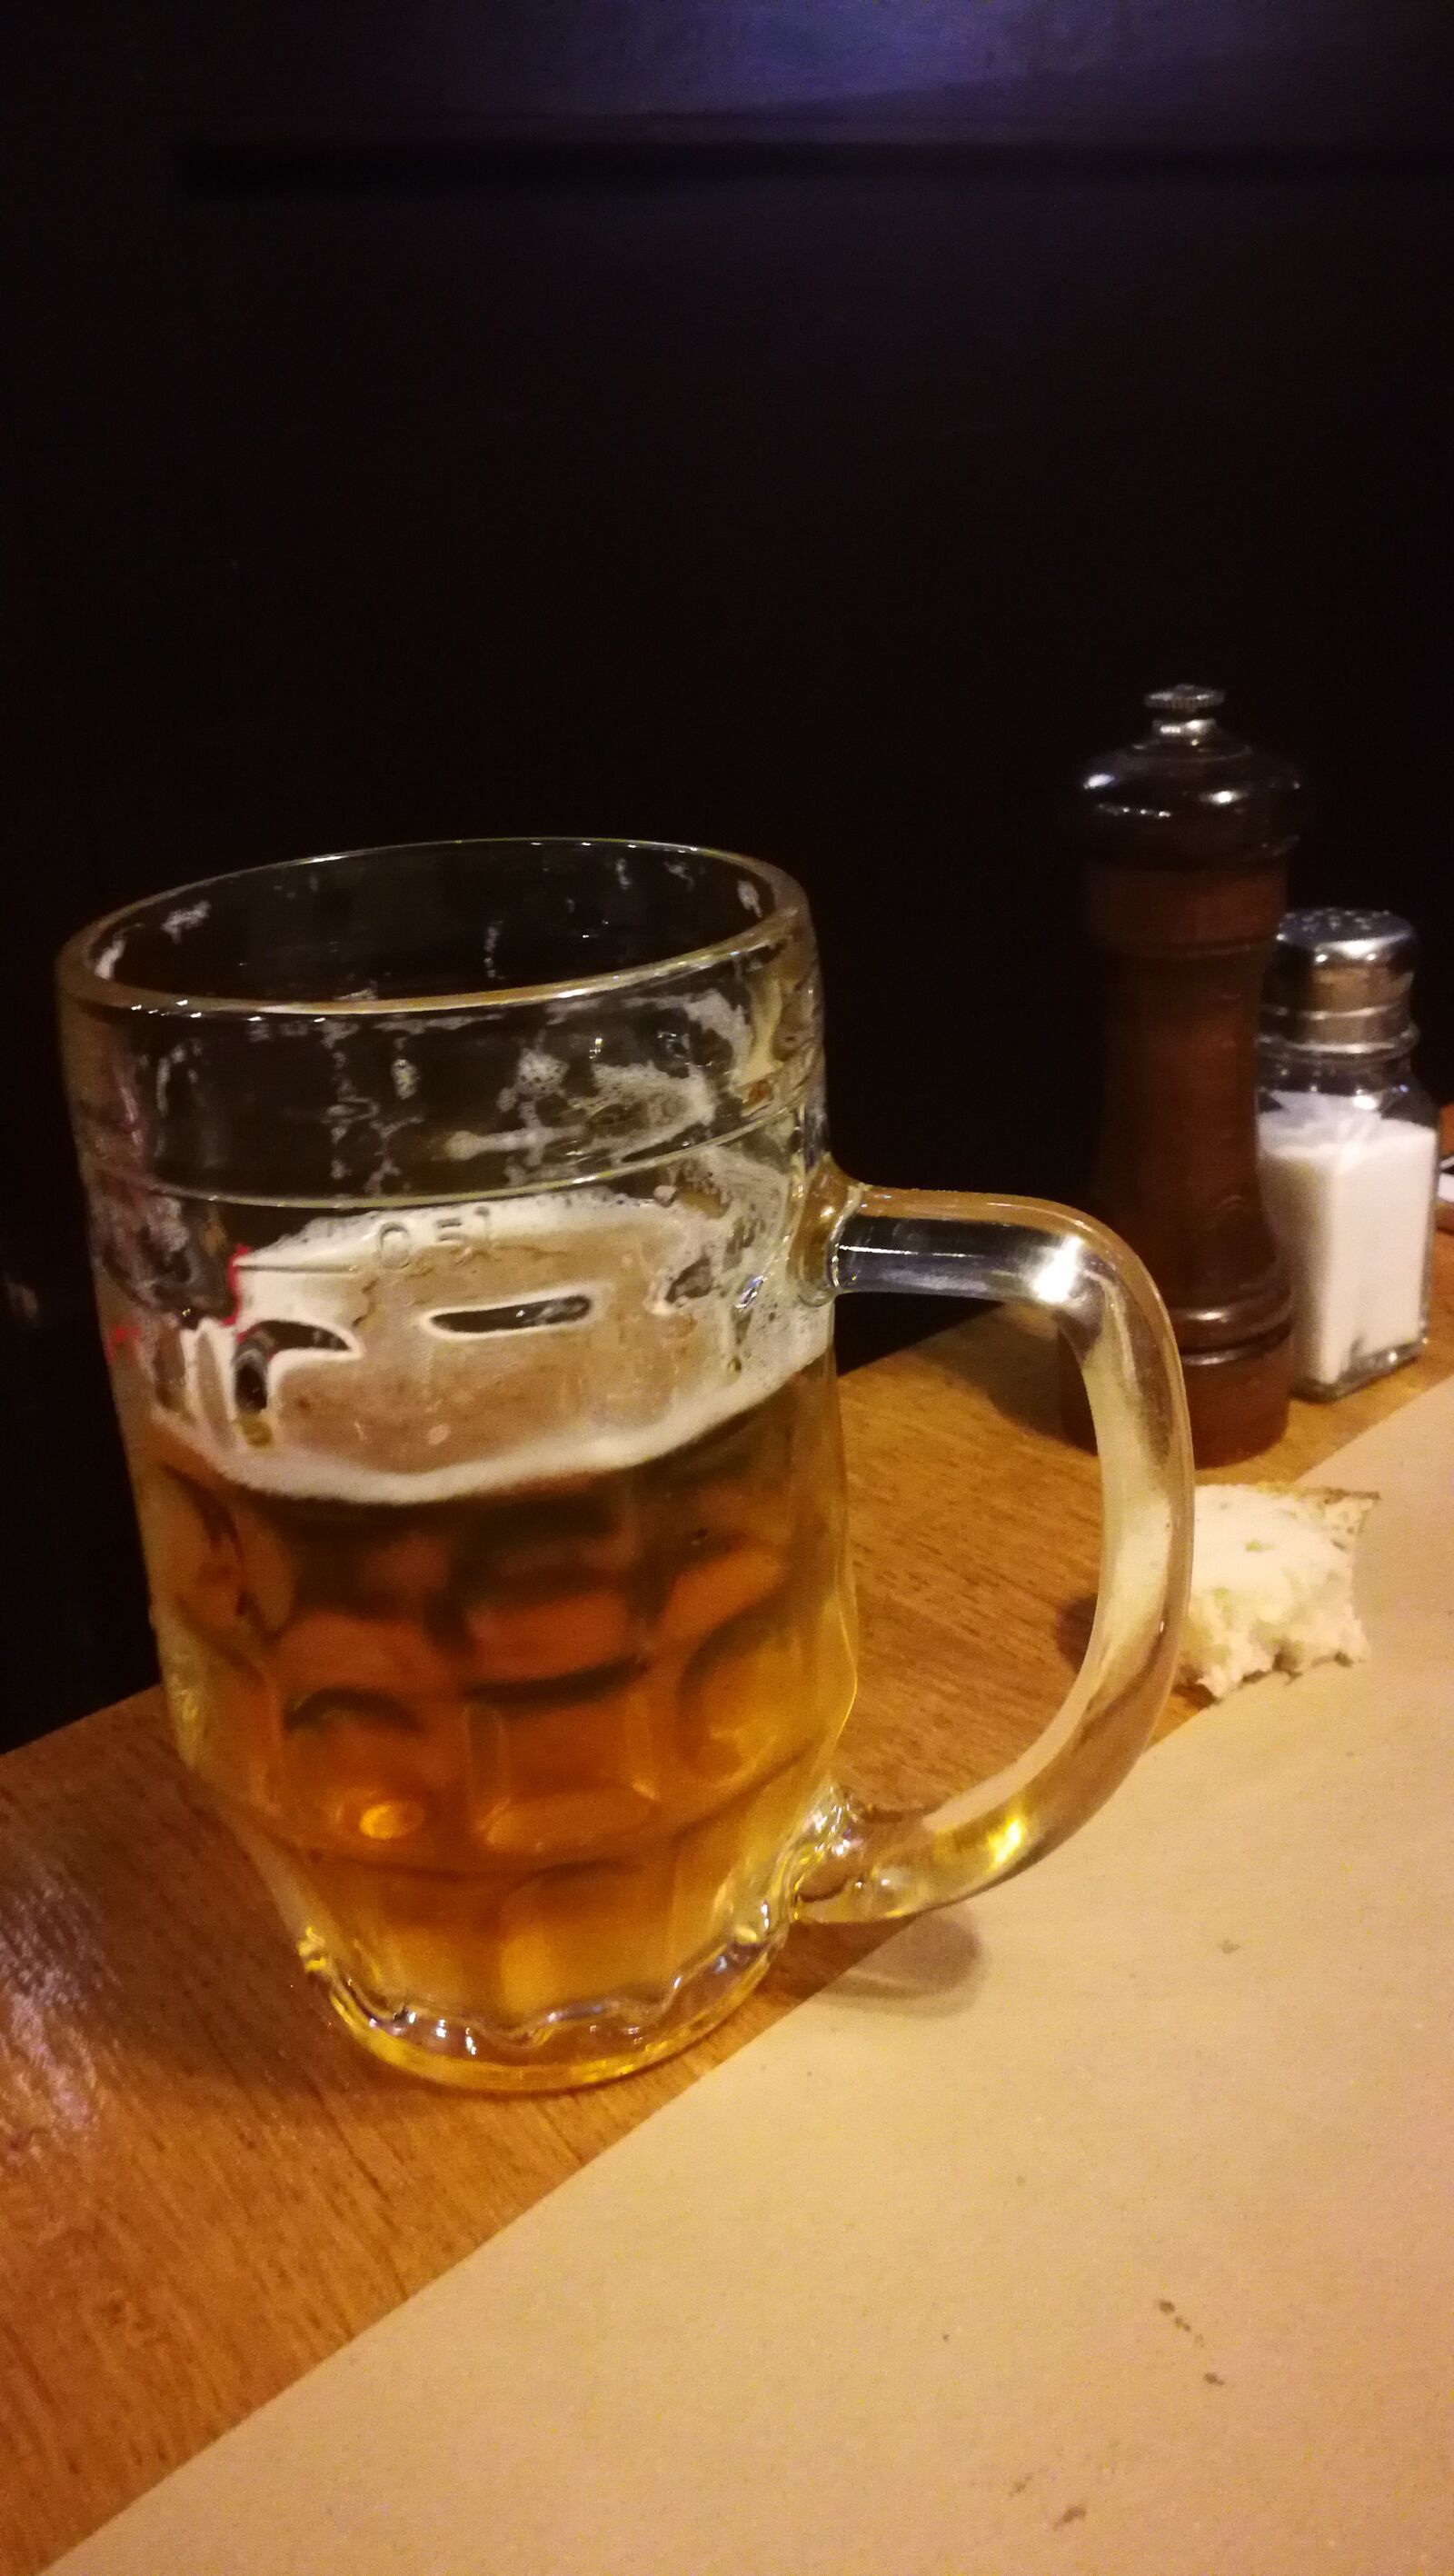 HUAWEI P10 sample photo. Beer, glass, restaurant photography